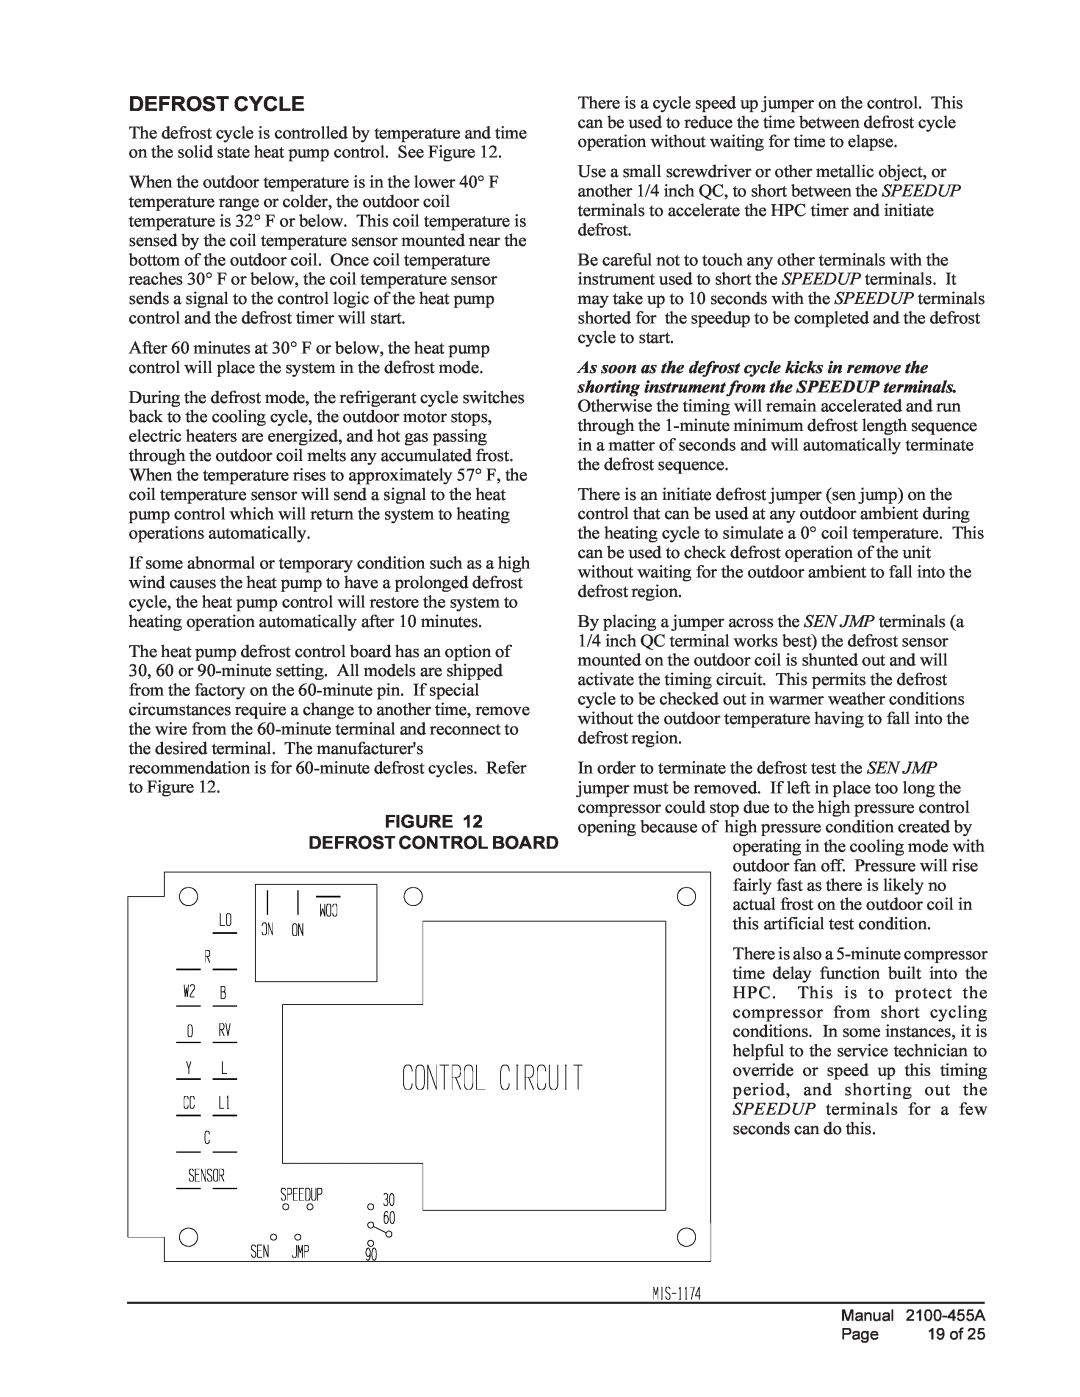 Bard CH5S1, CH4S1, CH3S1 installation instructions Defrost Cycle, Figure Defrost Control Board 